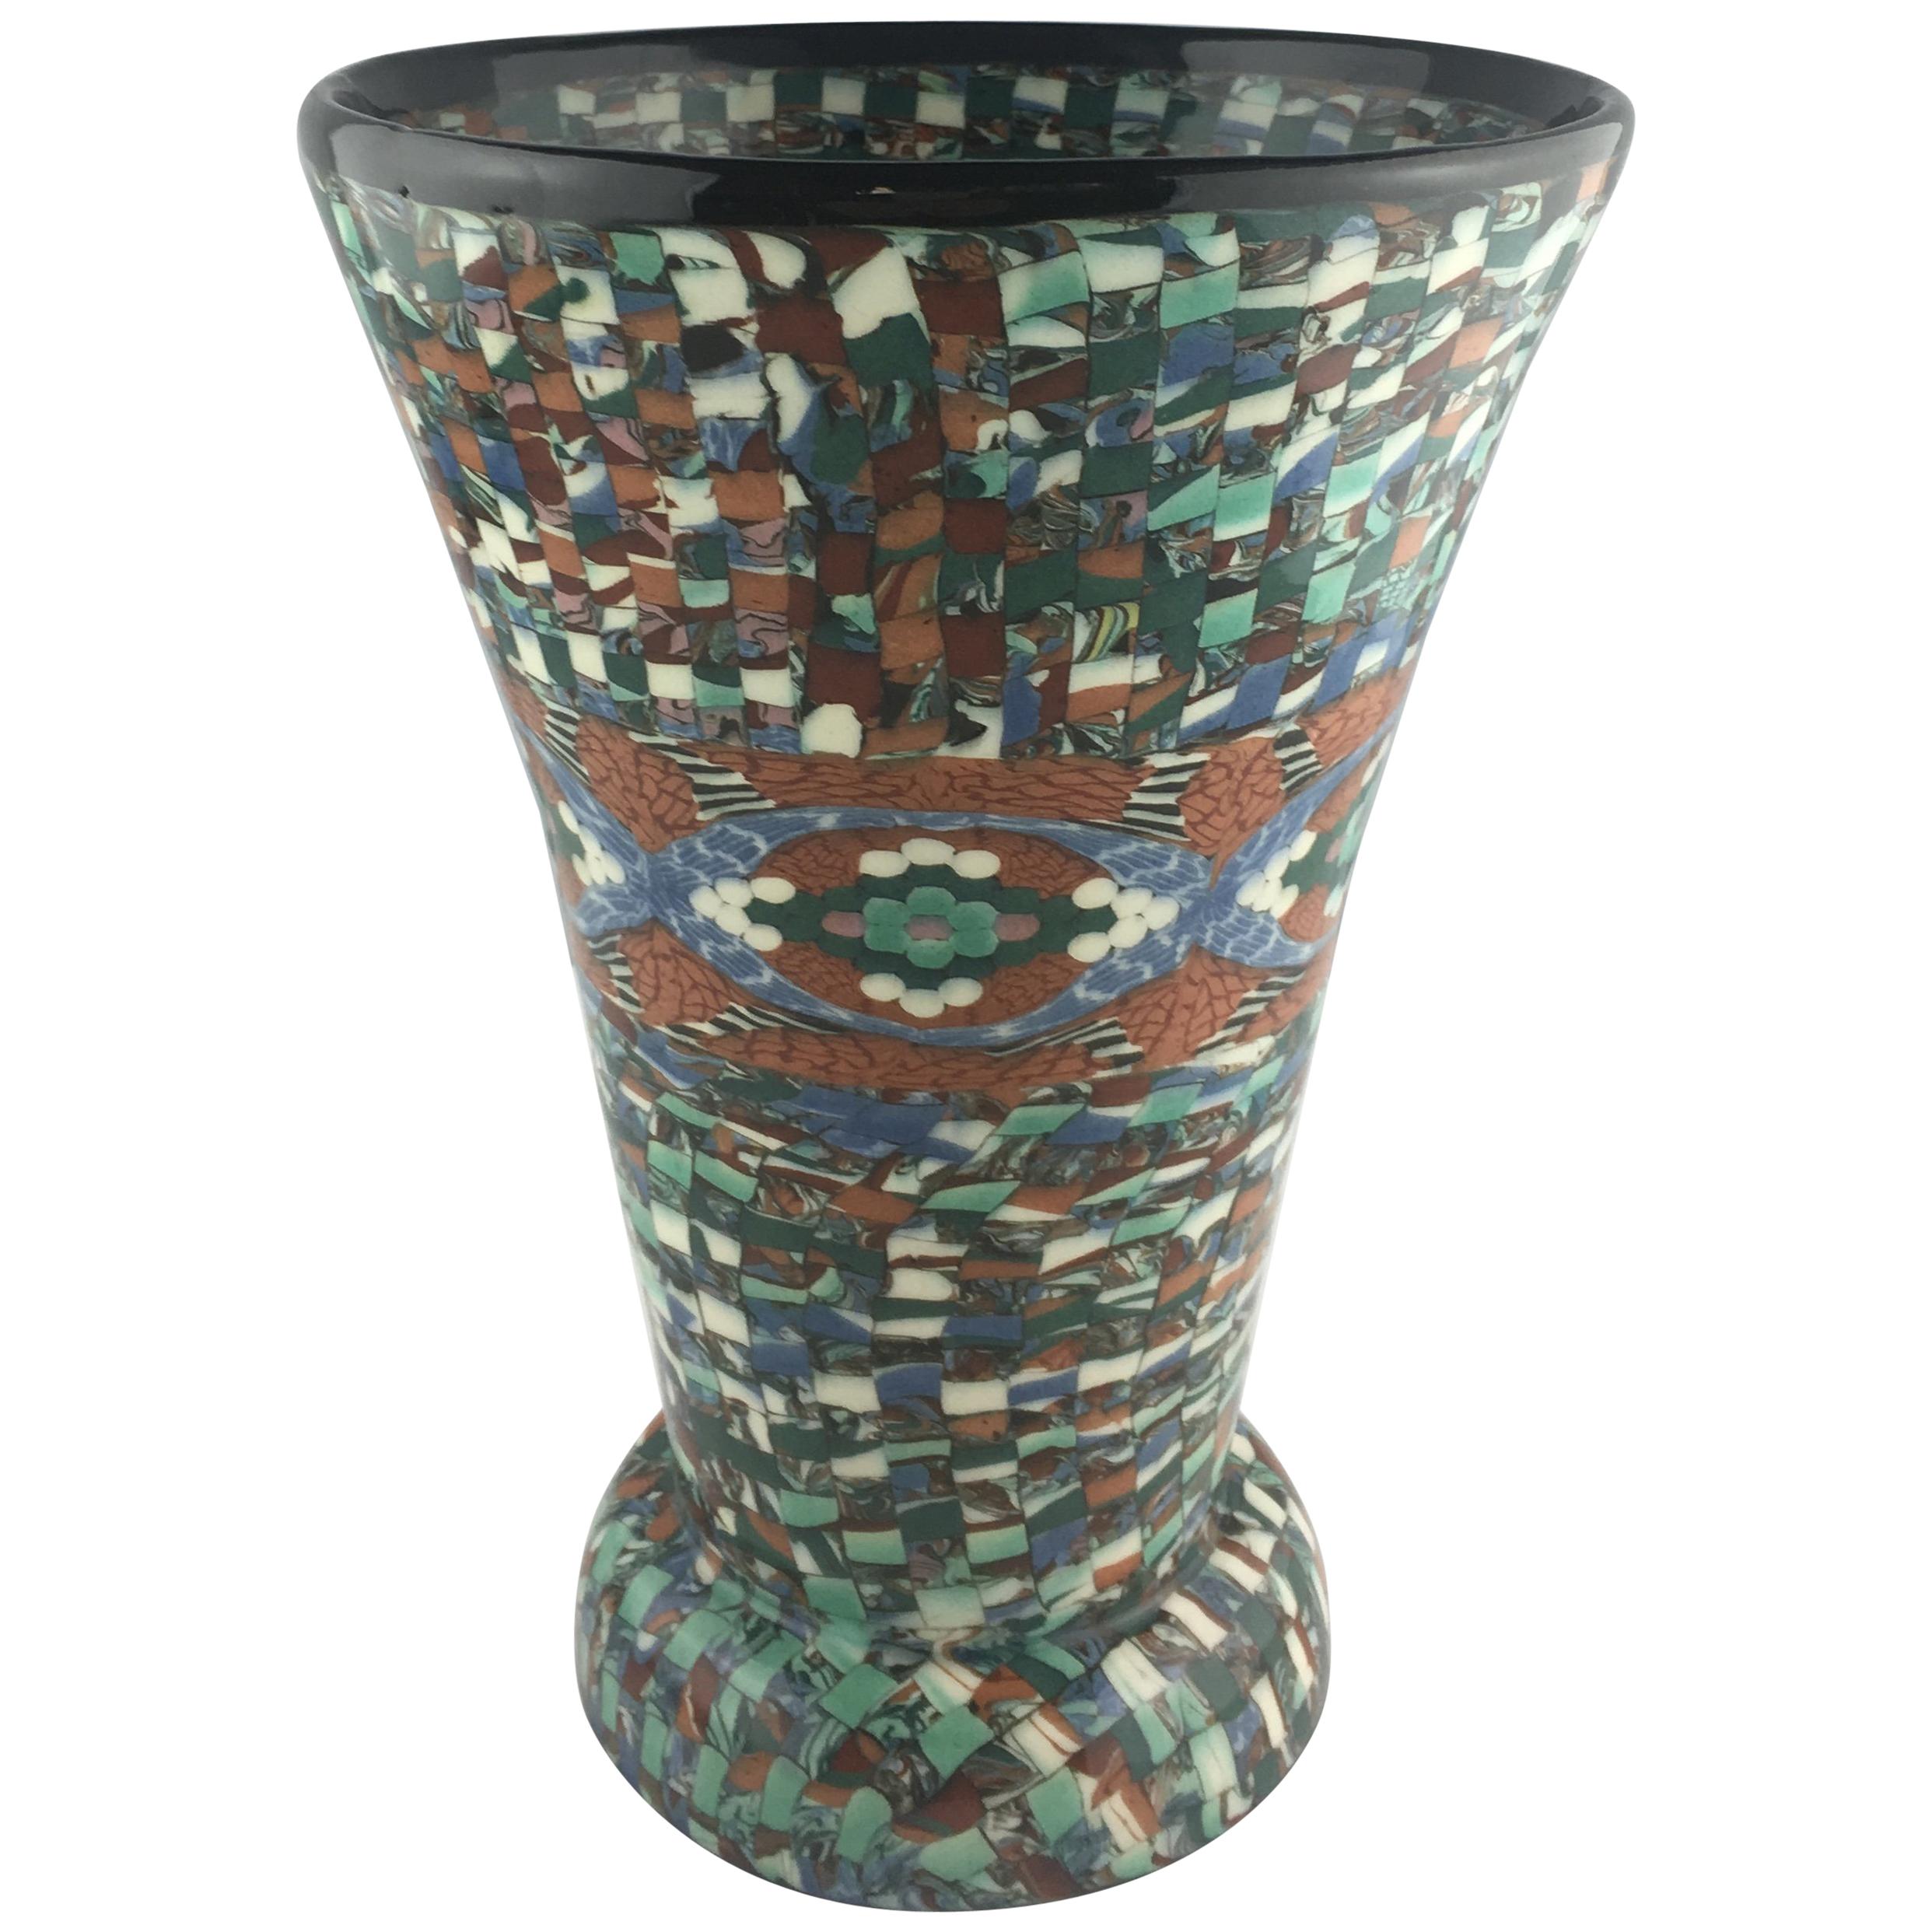 French Clay Mosaic Vase by Master Ceramicist Jean Gerbino, Vallauris